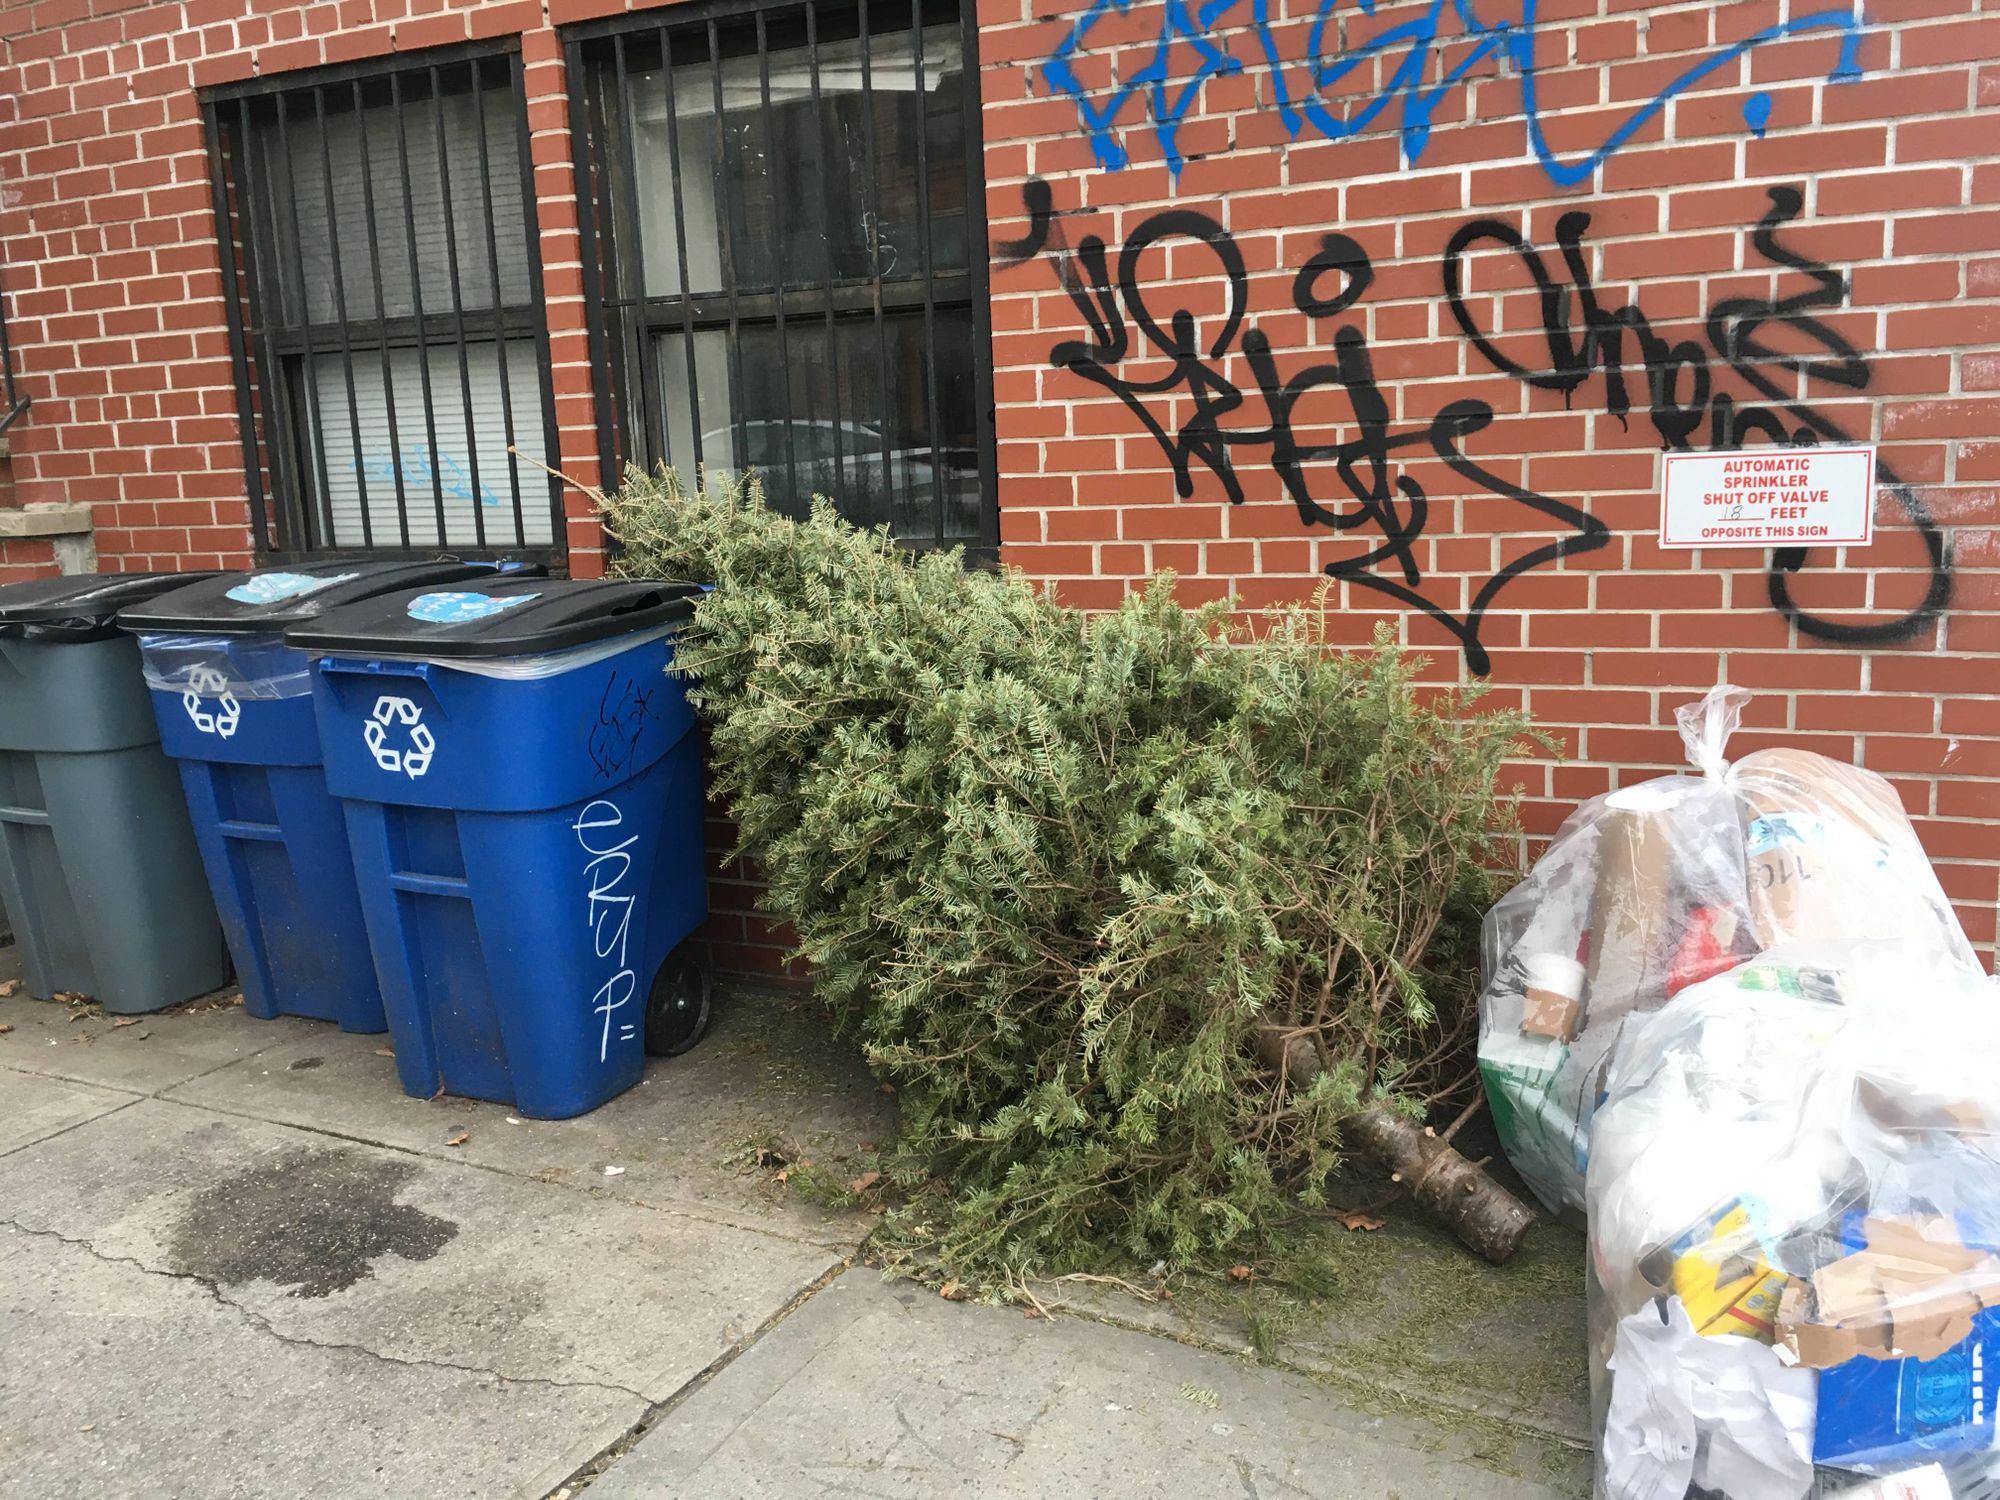 Mulchfest 2020: Here’s How to Dispose of that Christmas Tree